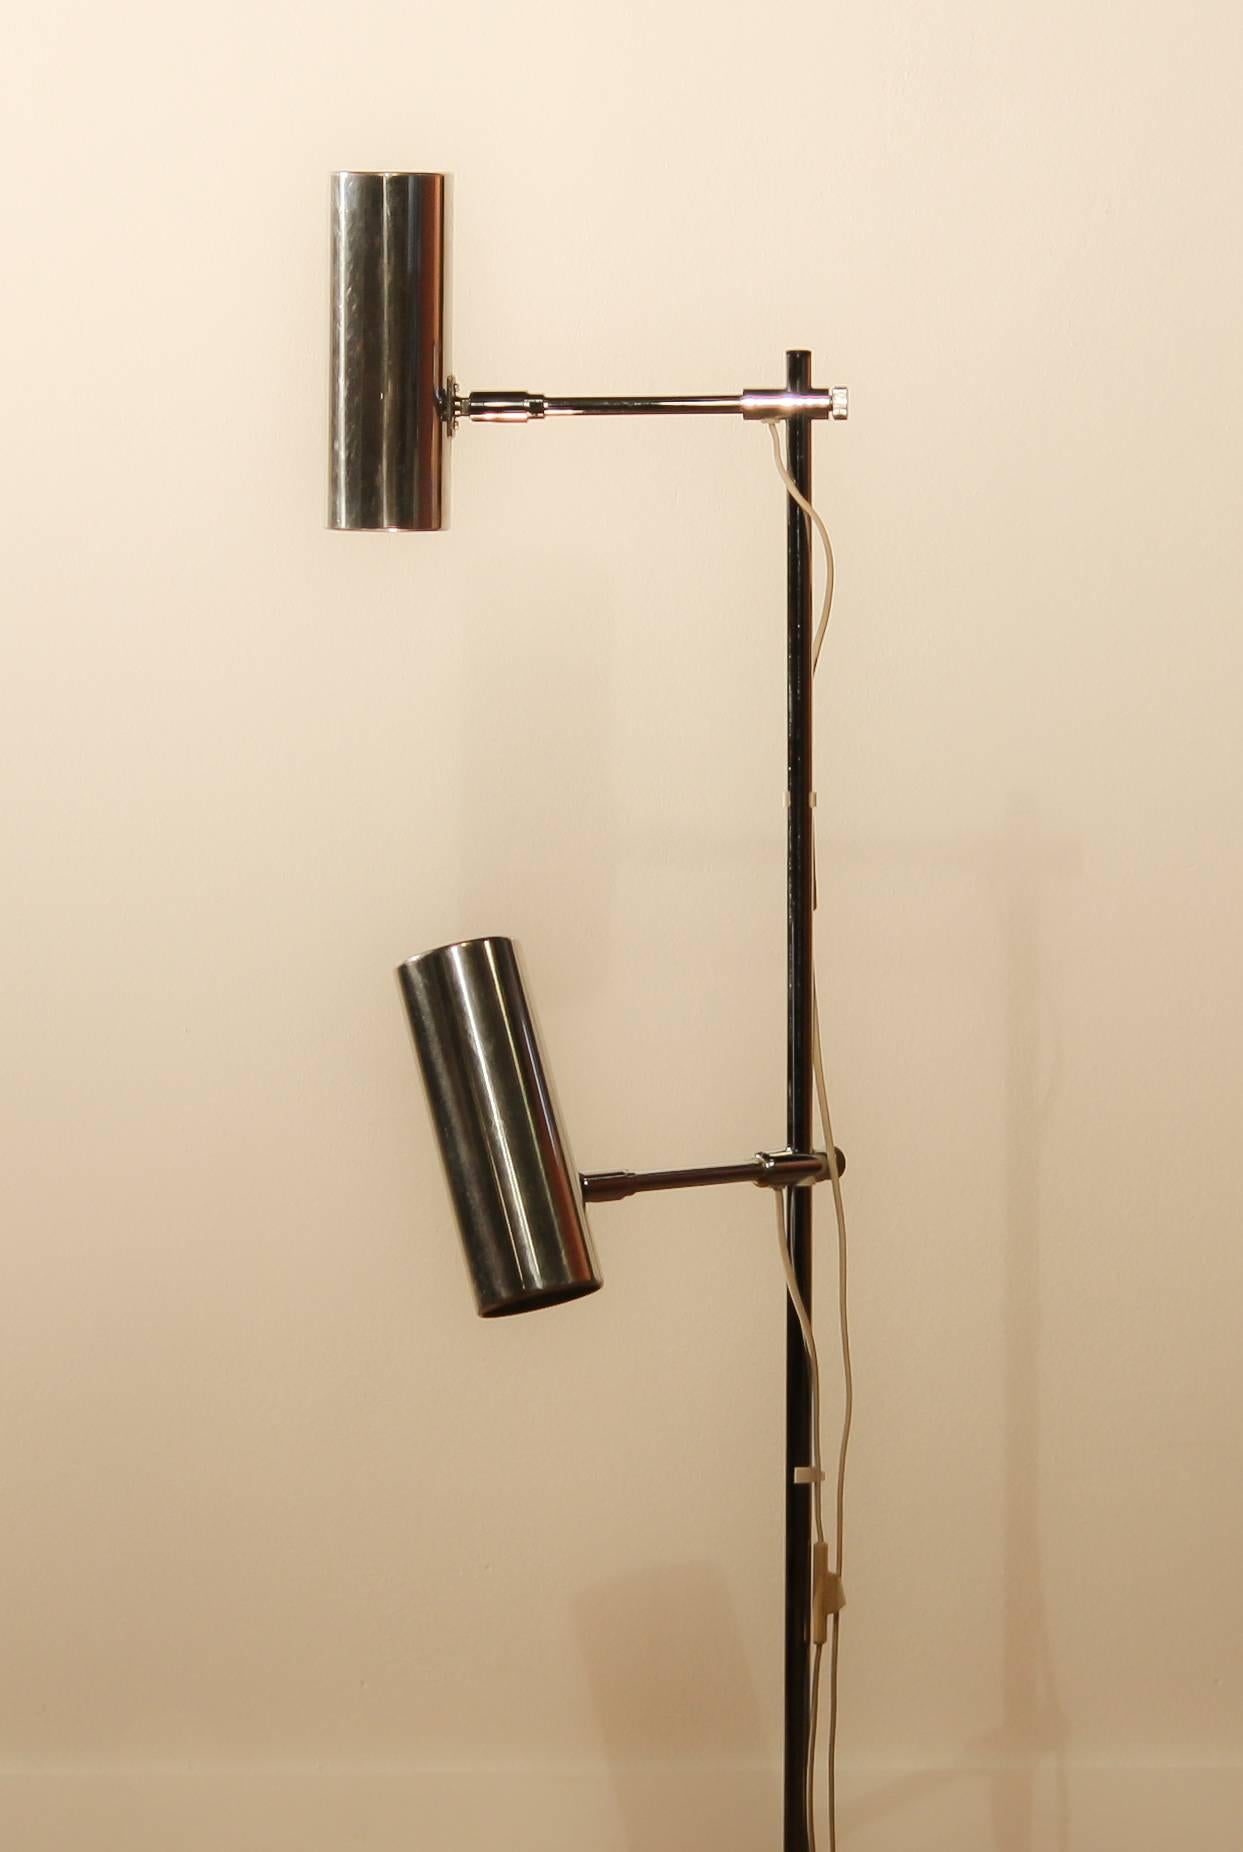 Beautiful floor lamp made by Bergboms Scanlight AB Sweden.
This lamp has two lights.
The lampshades are made of aluminium and the stand is made of chromed steel.
It is in a nice working condition.
Period 1960s
Dimensions: H. 112 cm ø 23 cm
The